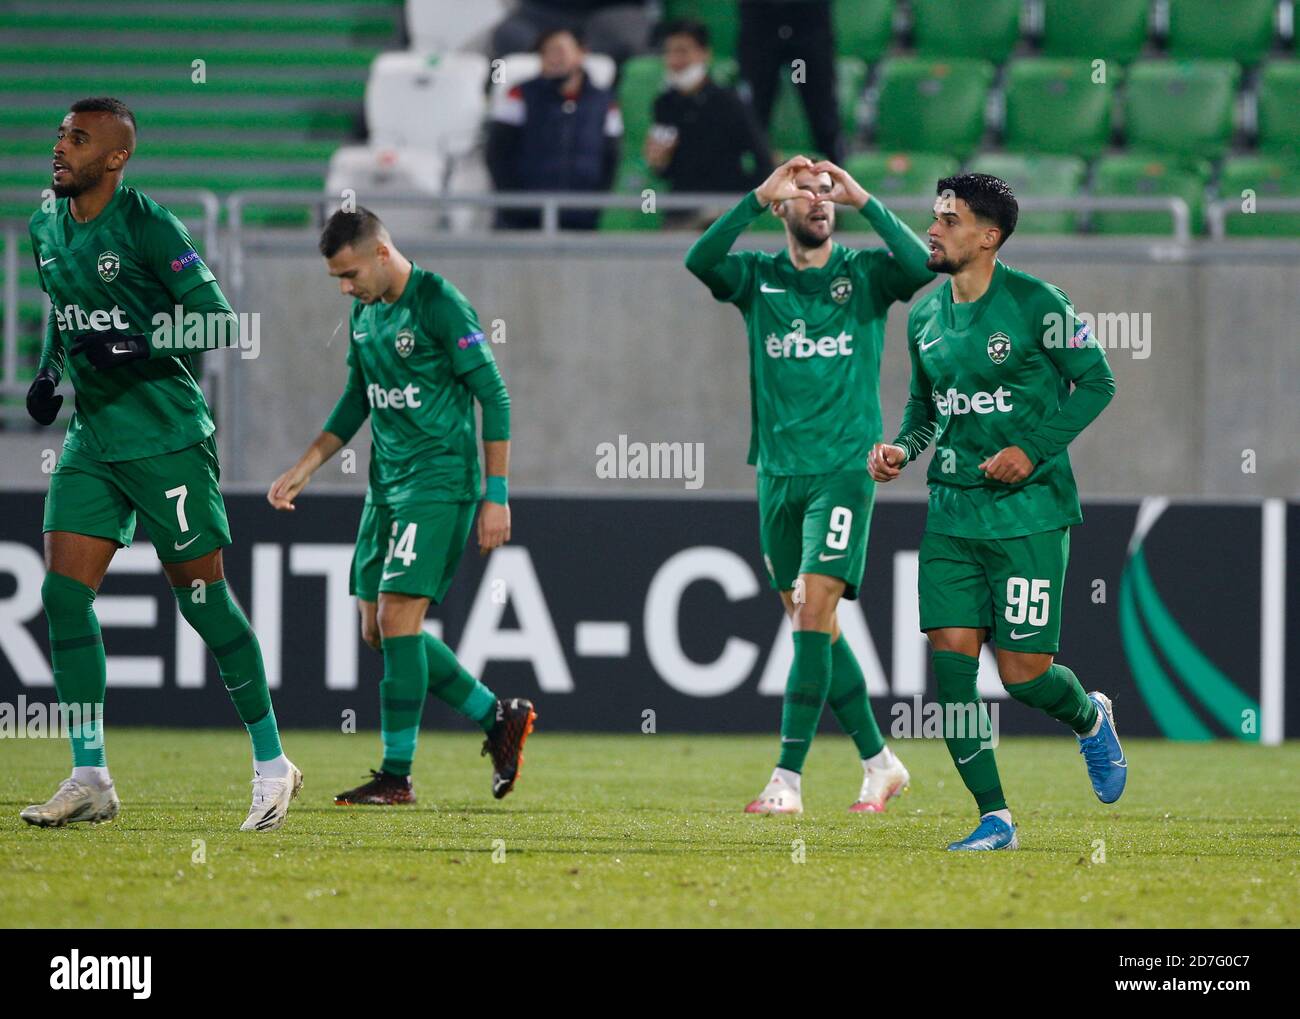 RAZGRAD, BULGARIA - OCTOBER 22: Higinio Marin of Ludogorets celebrates  after scoring his goal for 1-0 in 46th minute during the UEFA Europa League  Group J stage match between PFC Ludogorets Razgrad